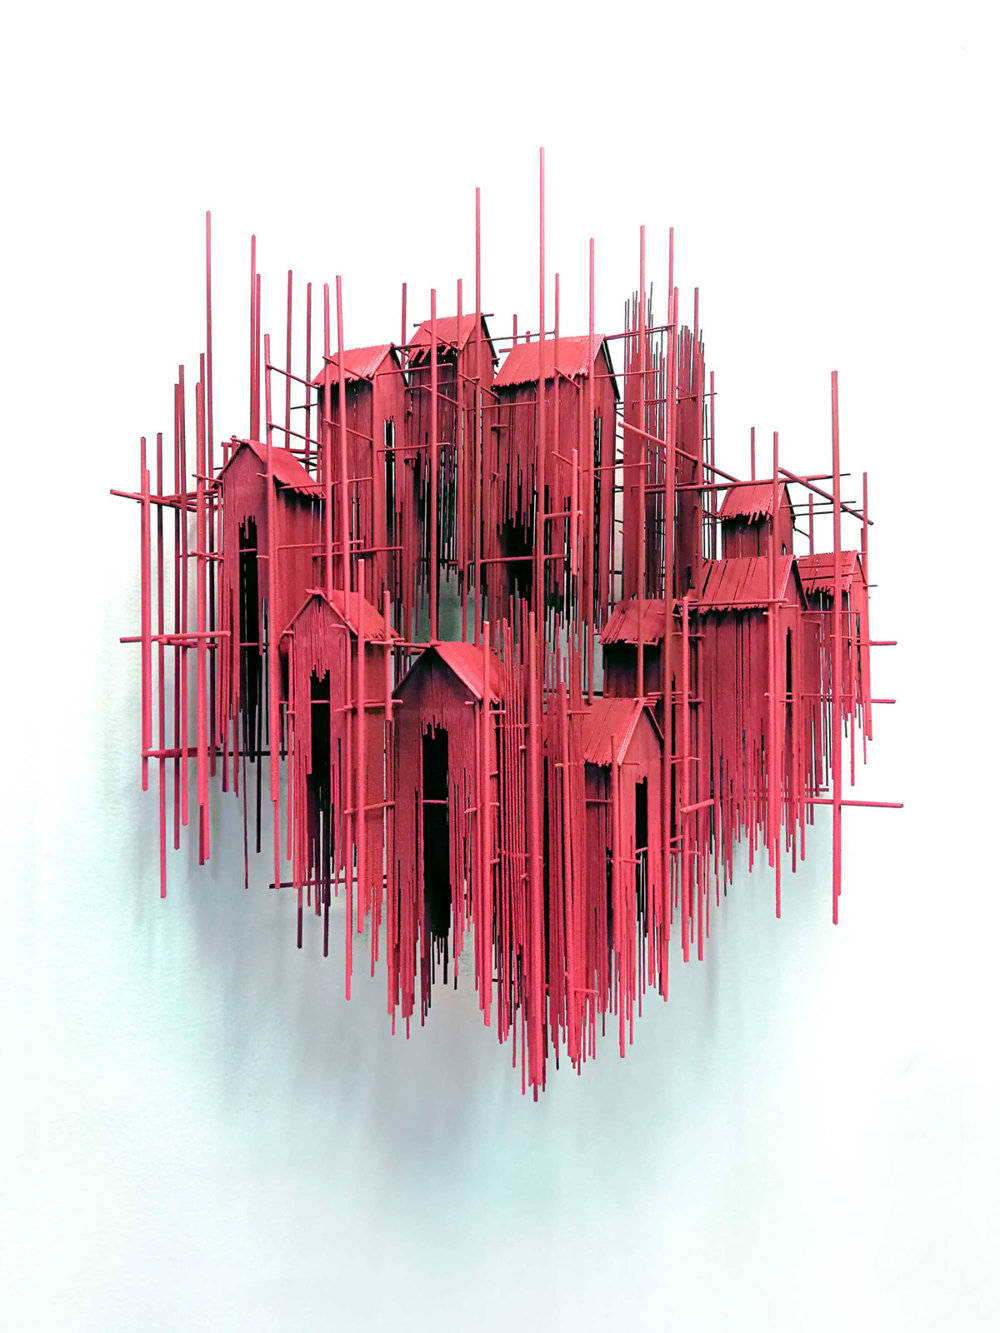 Metal Sketches Architectural Steel Wire Sculptures By David Moreno 13